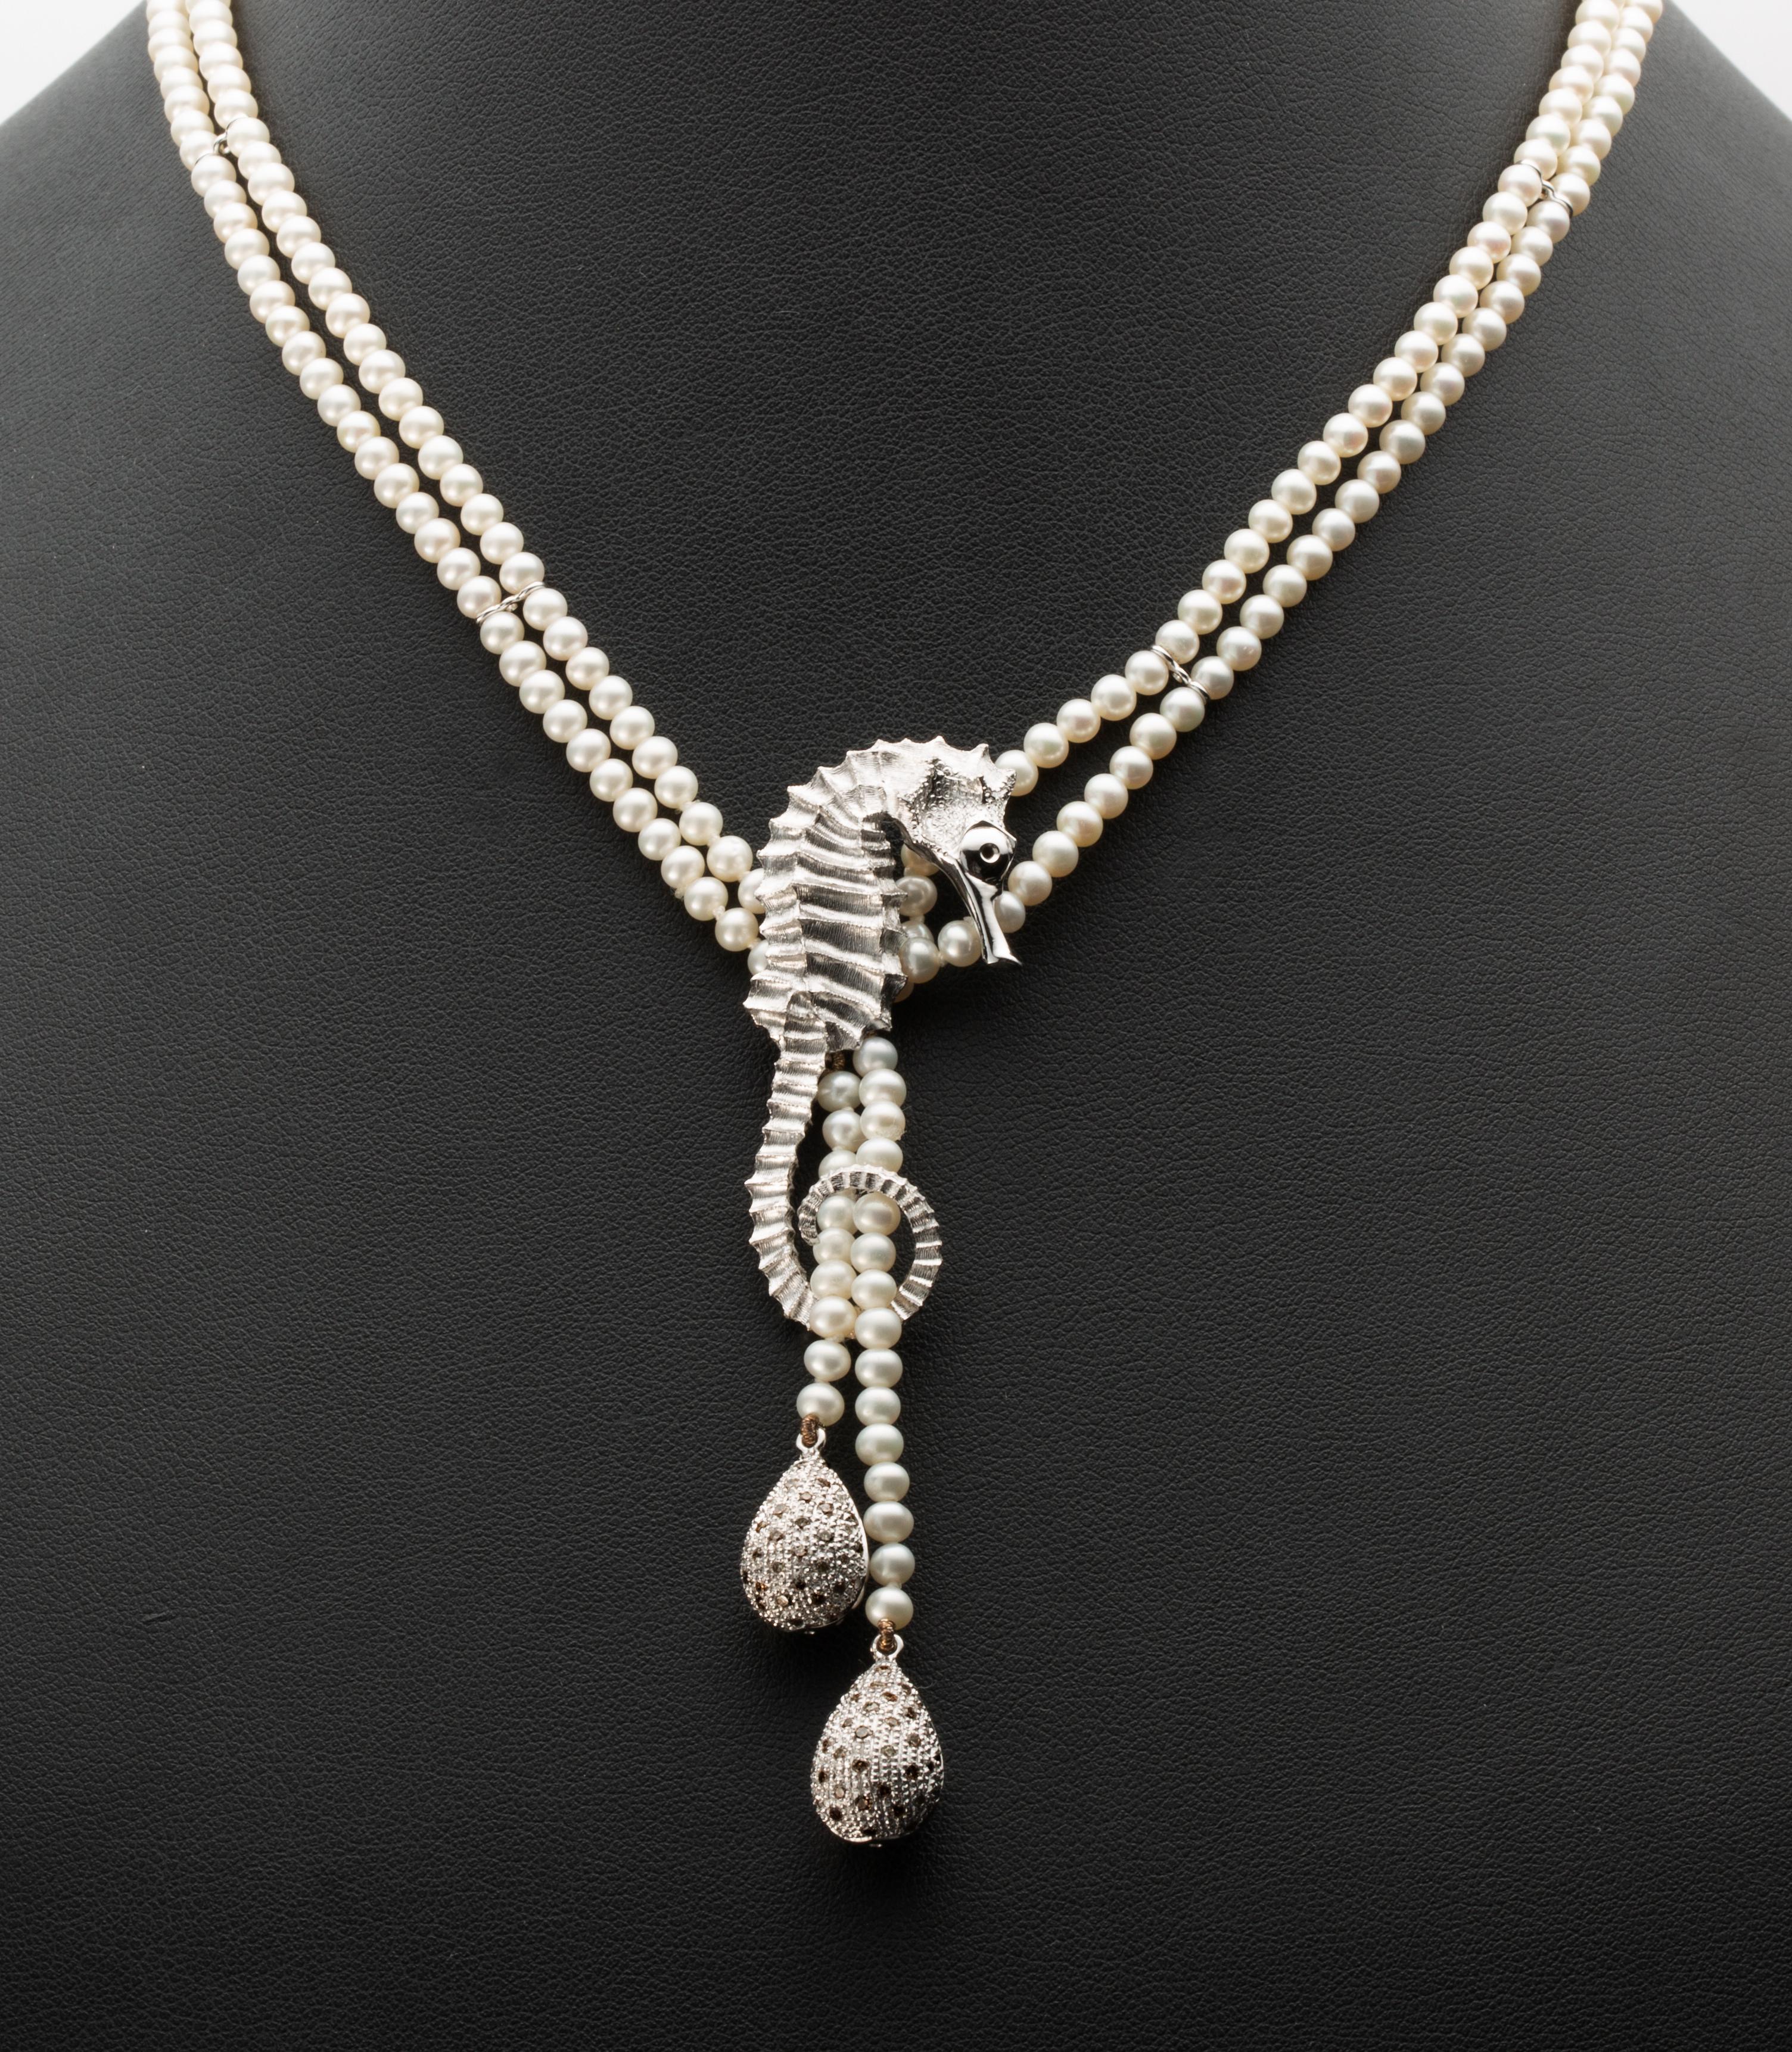 Round Cut Seahorse Necklace with Freshwater Pearls, Diamond Pavè Drops in 18kt White Gold For Sale